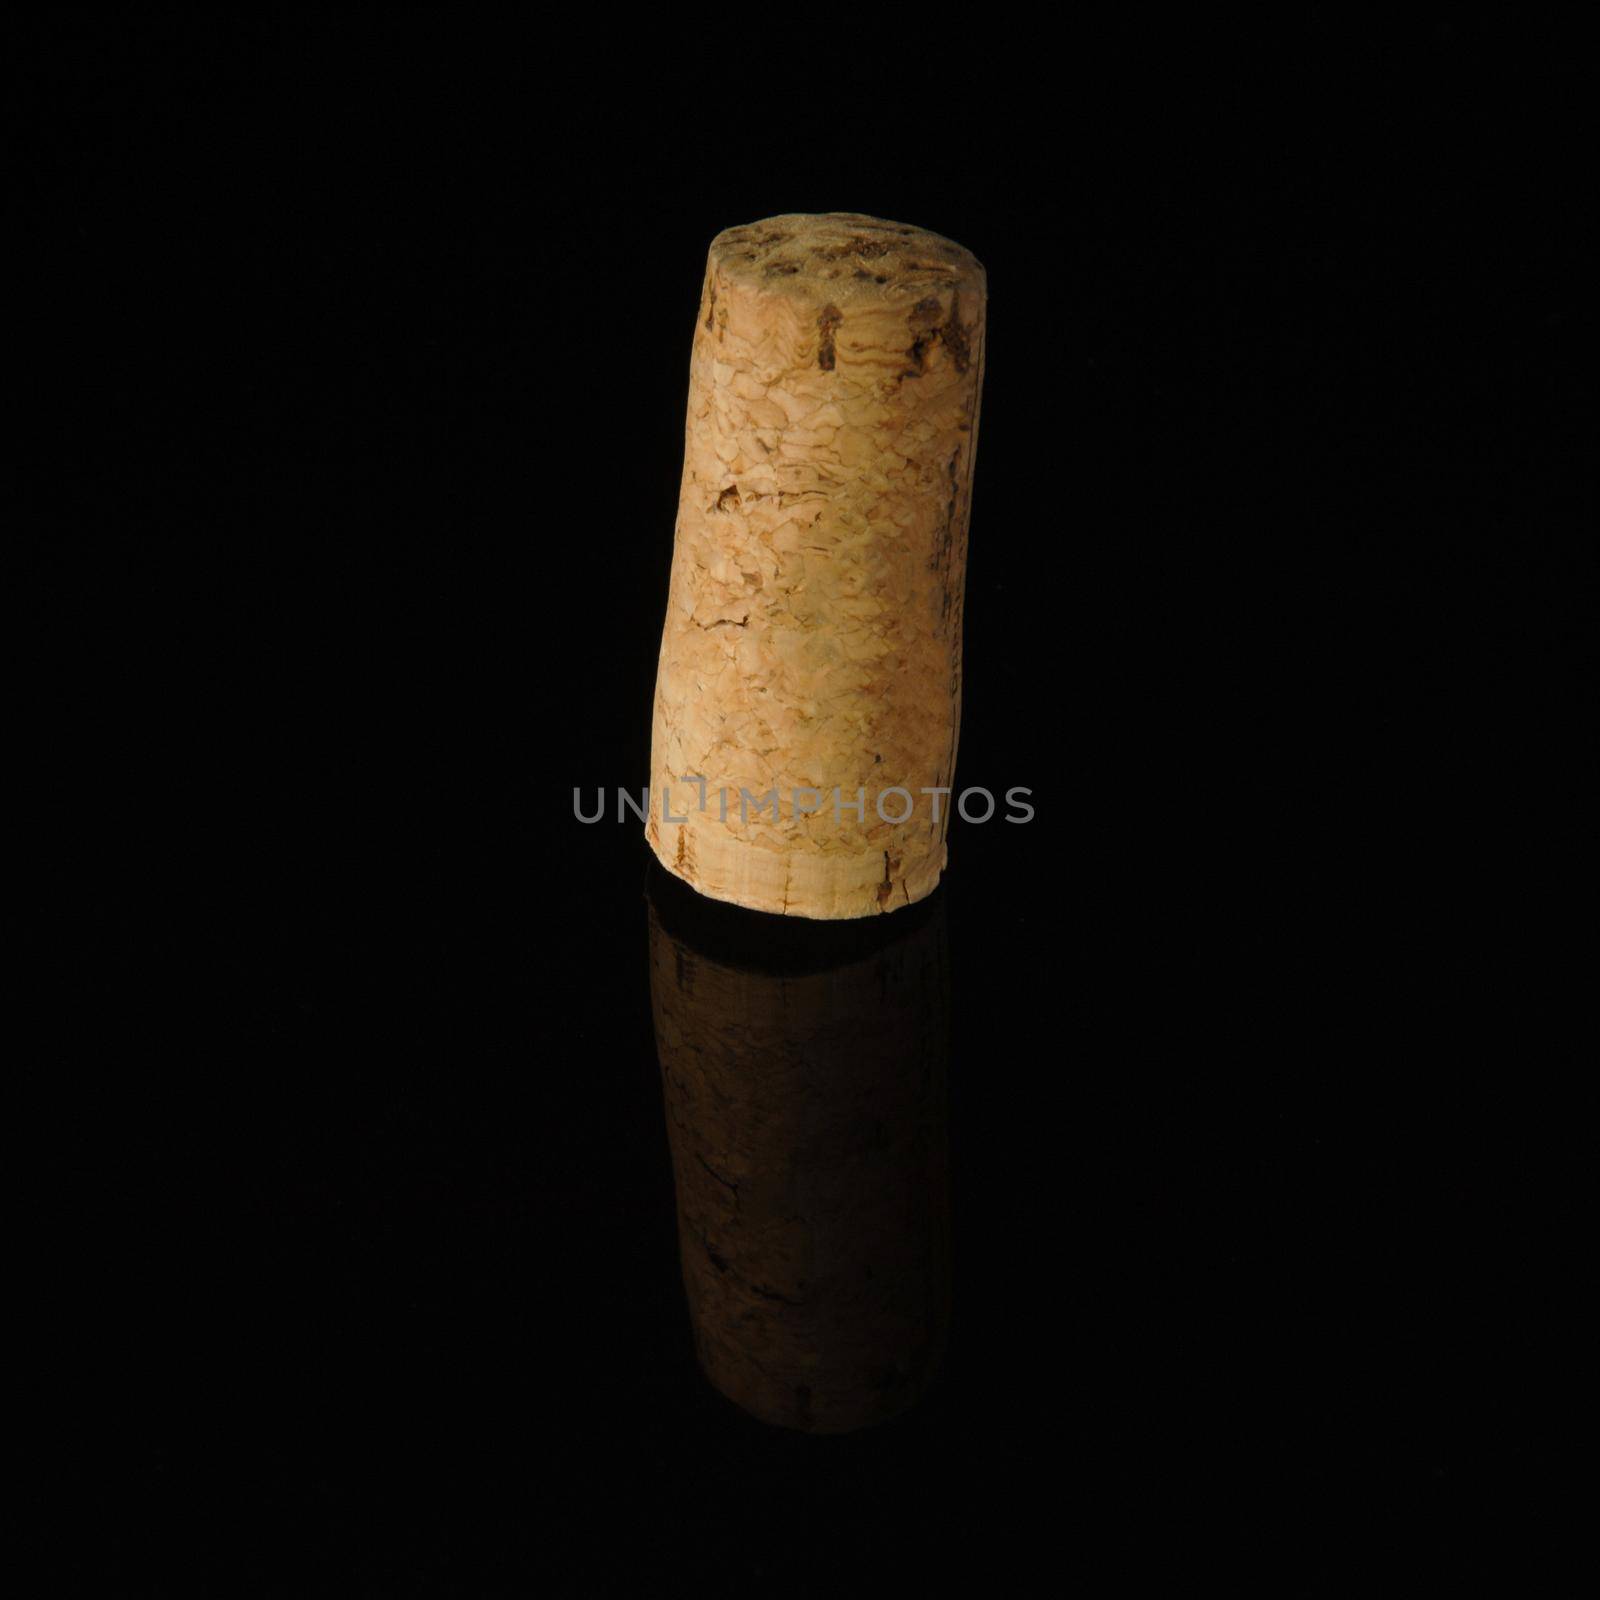 Close-up shot of a wine cork on a reflecting surface. by A_Karim